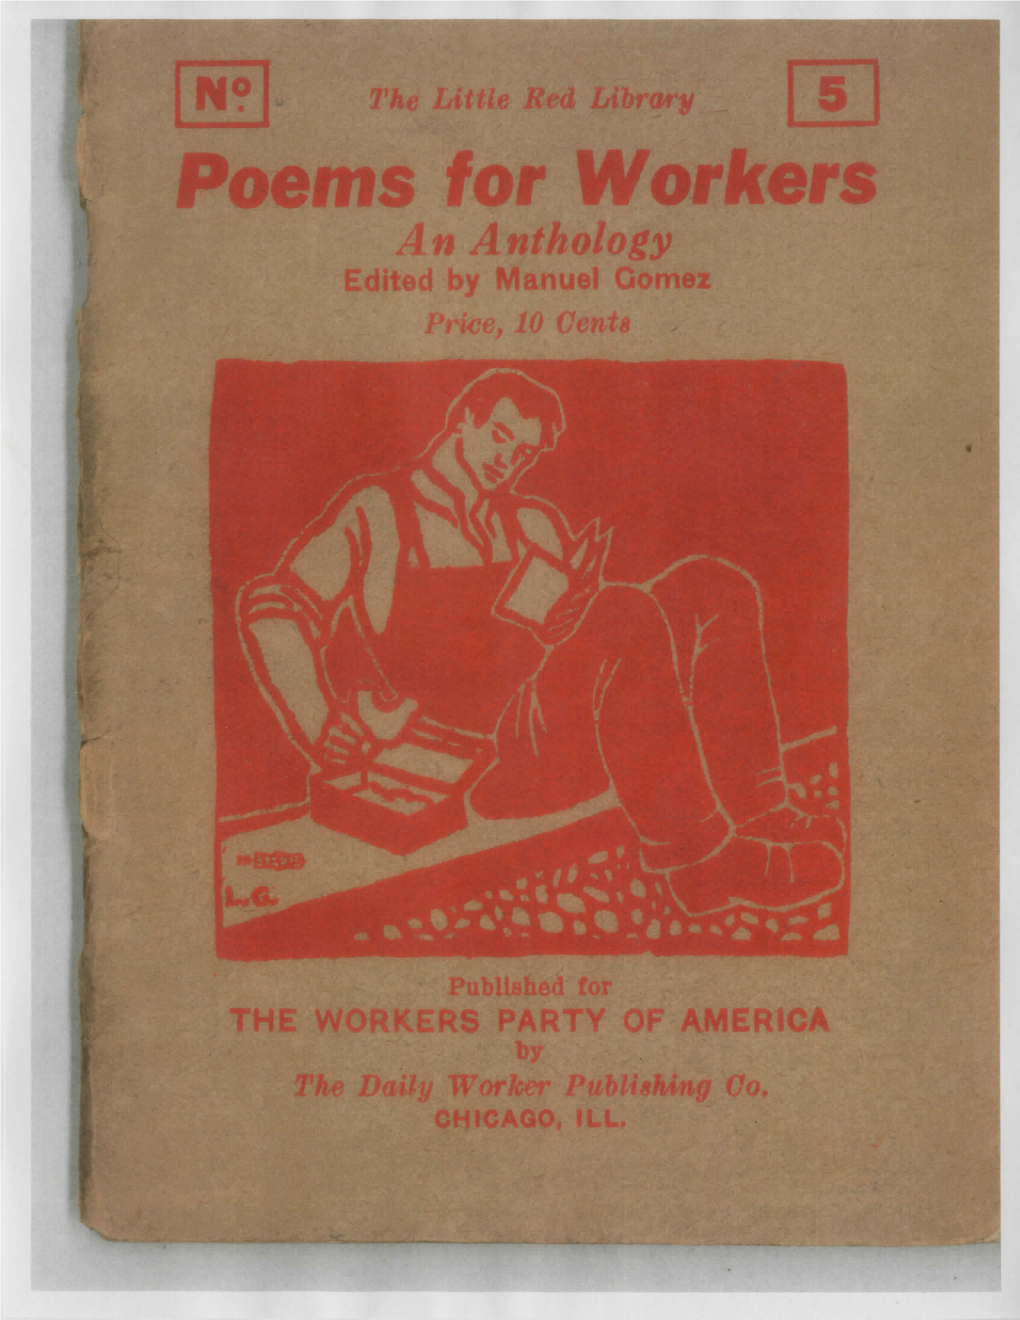 Poems for Workers an Anthology Edited by Manuel Comez Price, 10 Cents